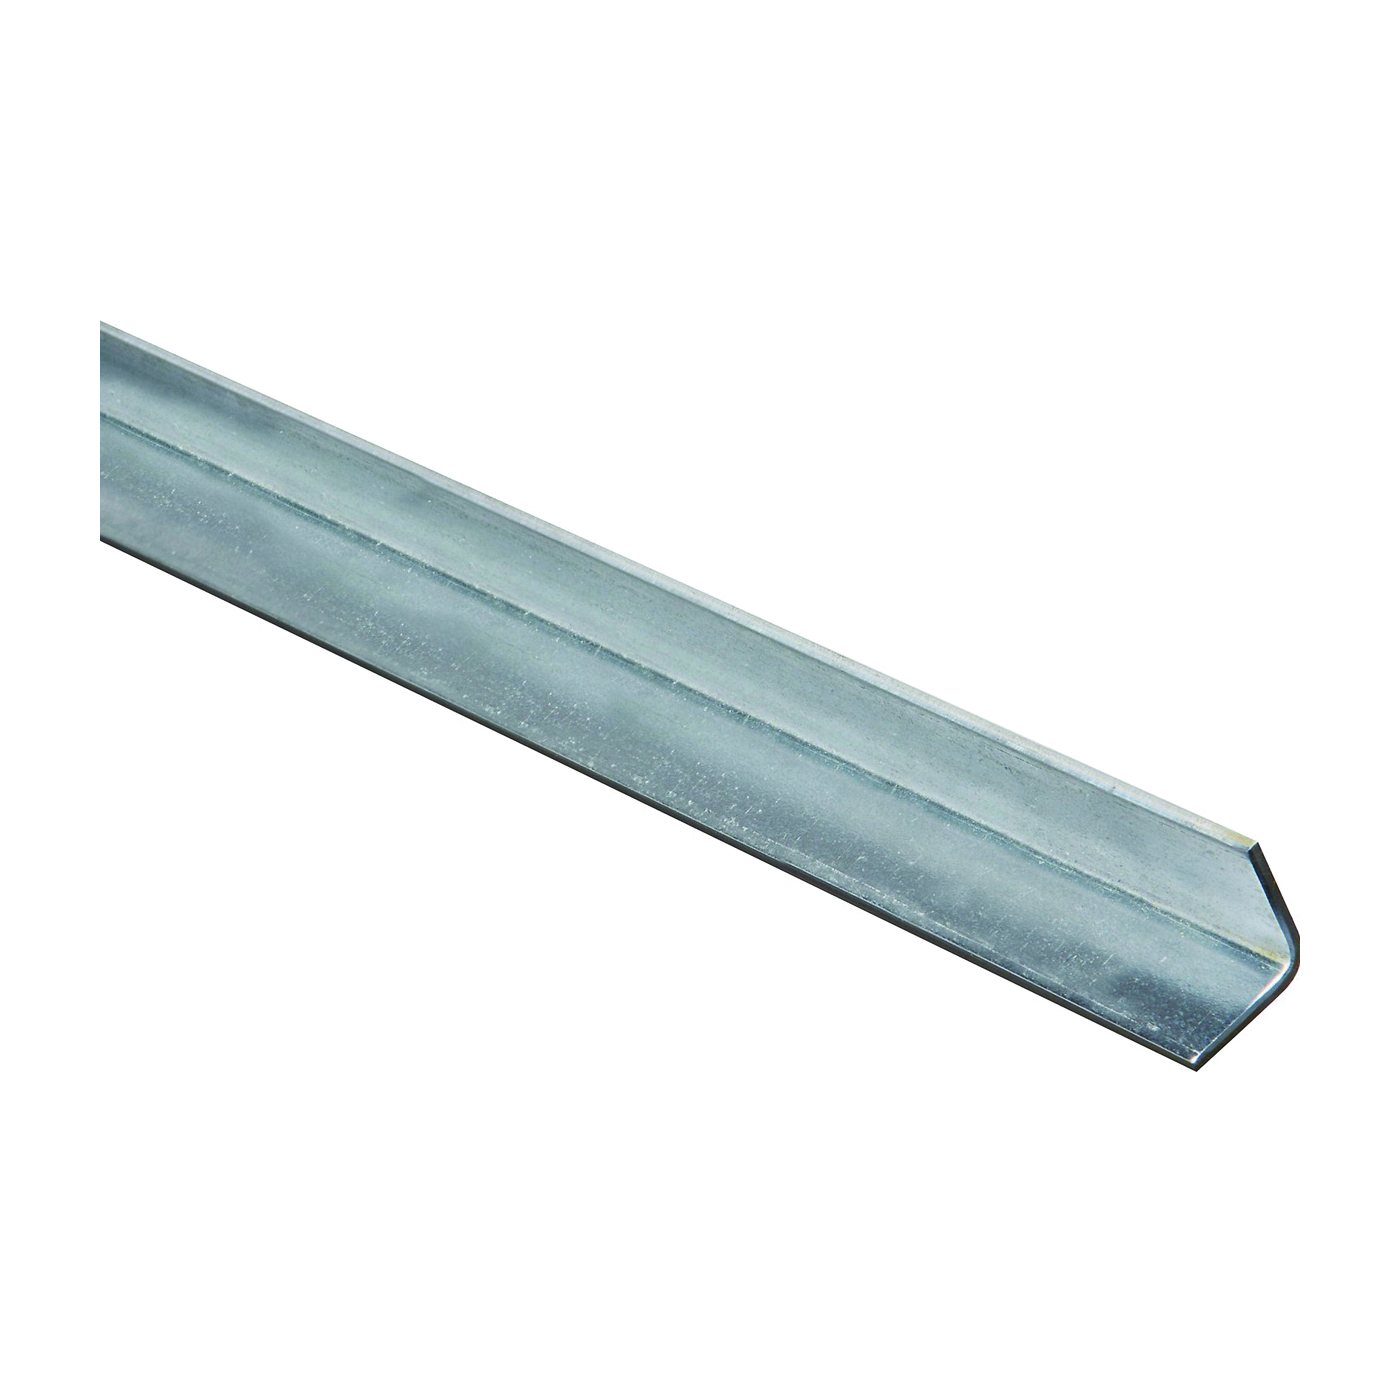 4010BC Series N179-937 Angle Stock, 1 in L Leg, 48 in L, 0.12 in Thick, Steel, Galvanized